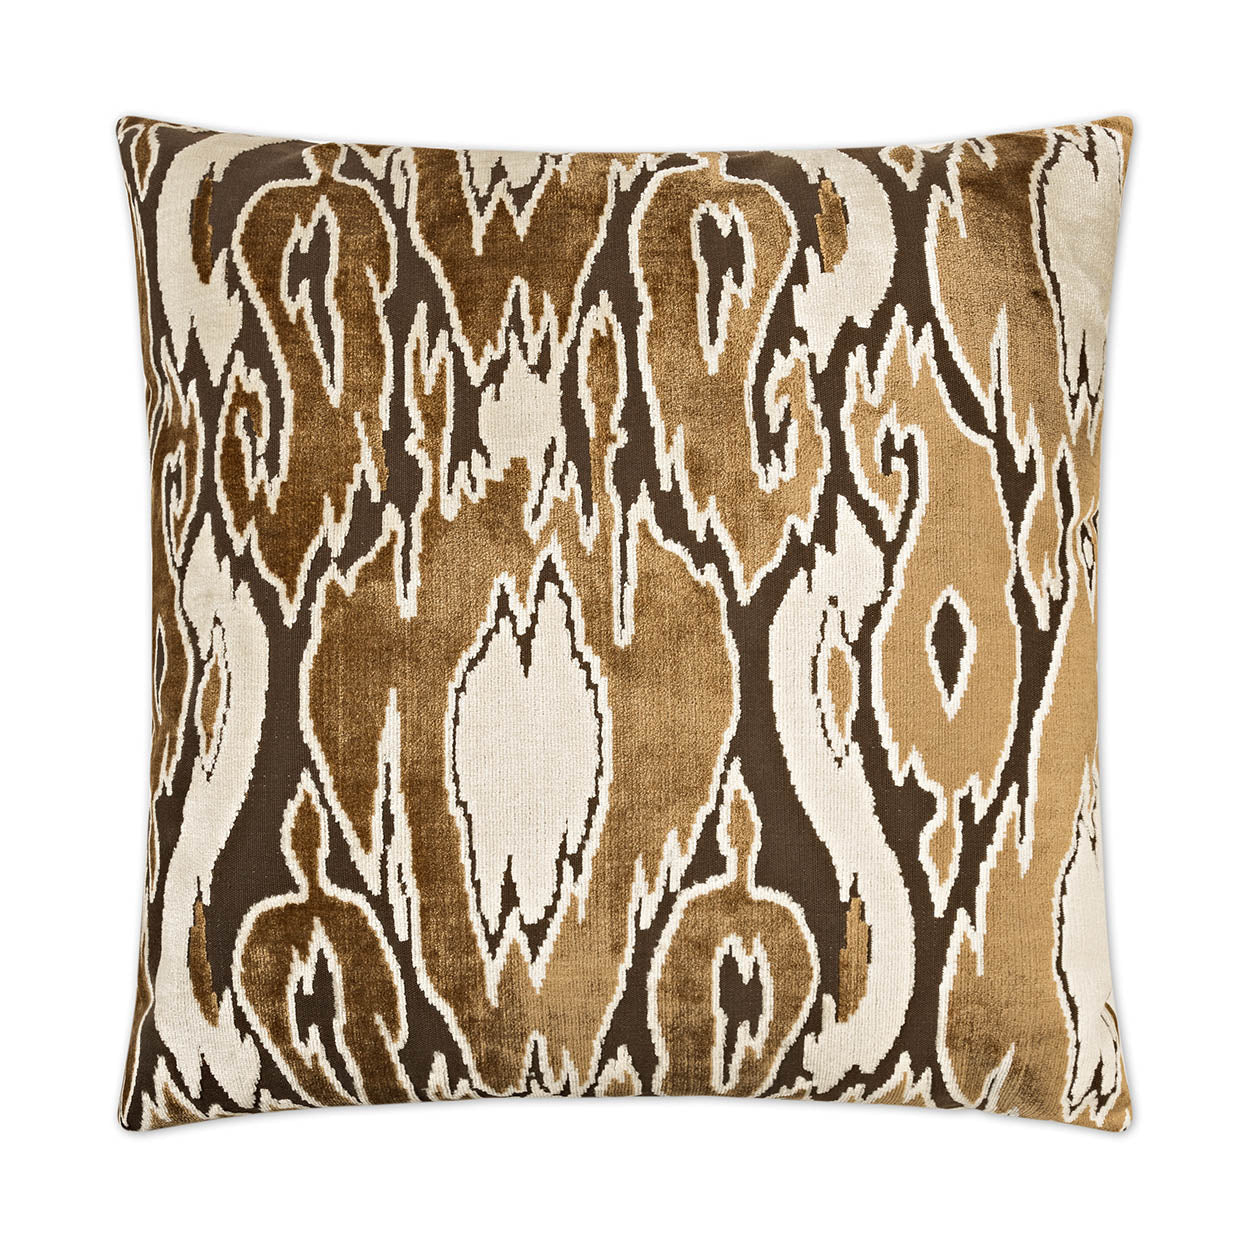 Luxury Pillow 24” x 14” - Maldives Bittersweet; Velvet fabric of browns & white in an abstract pattern